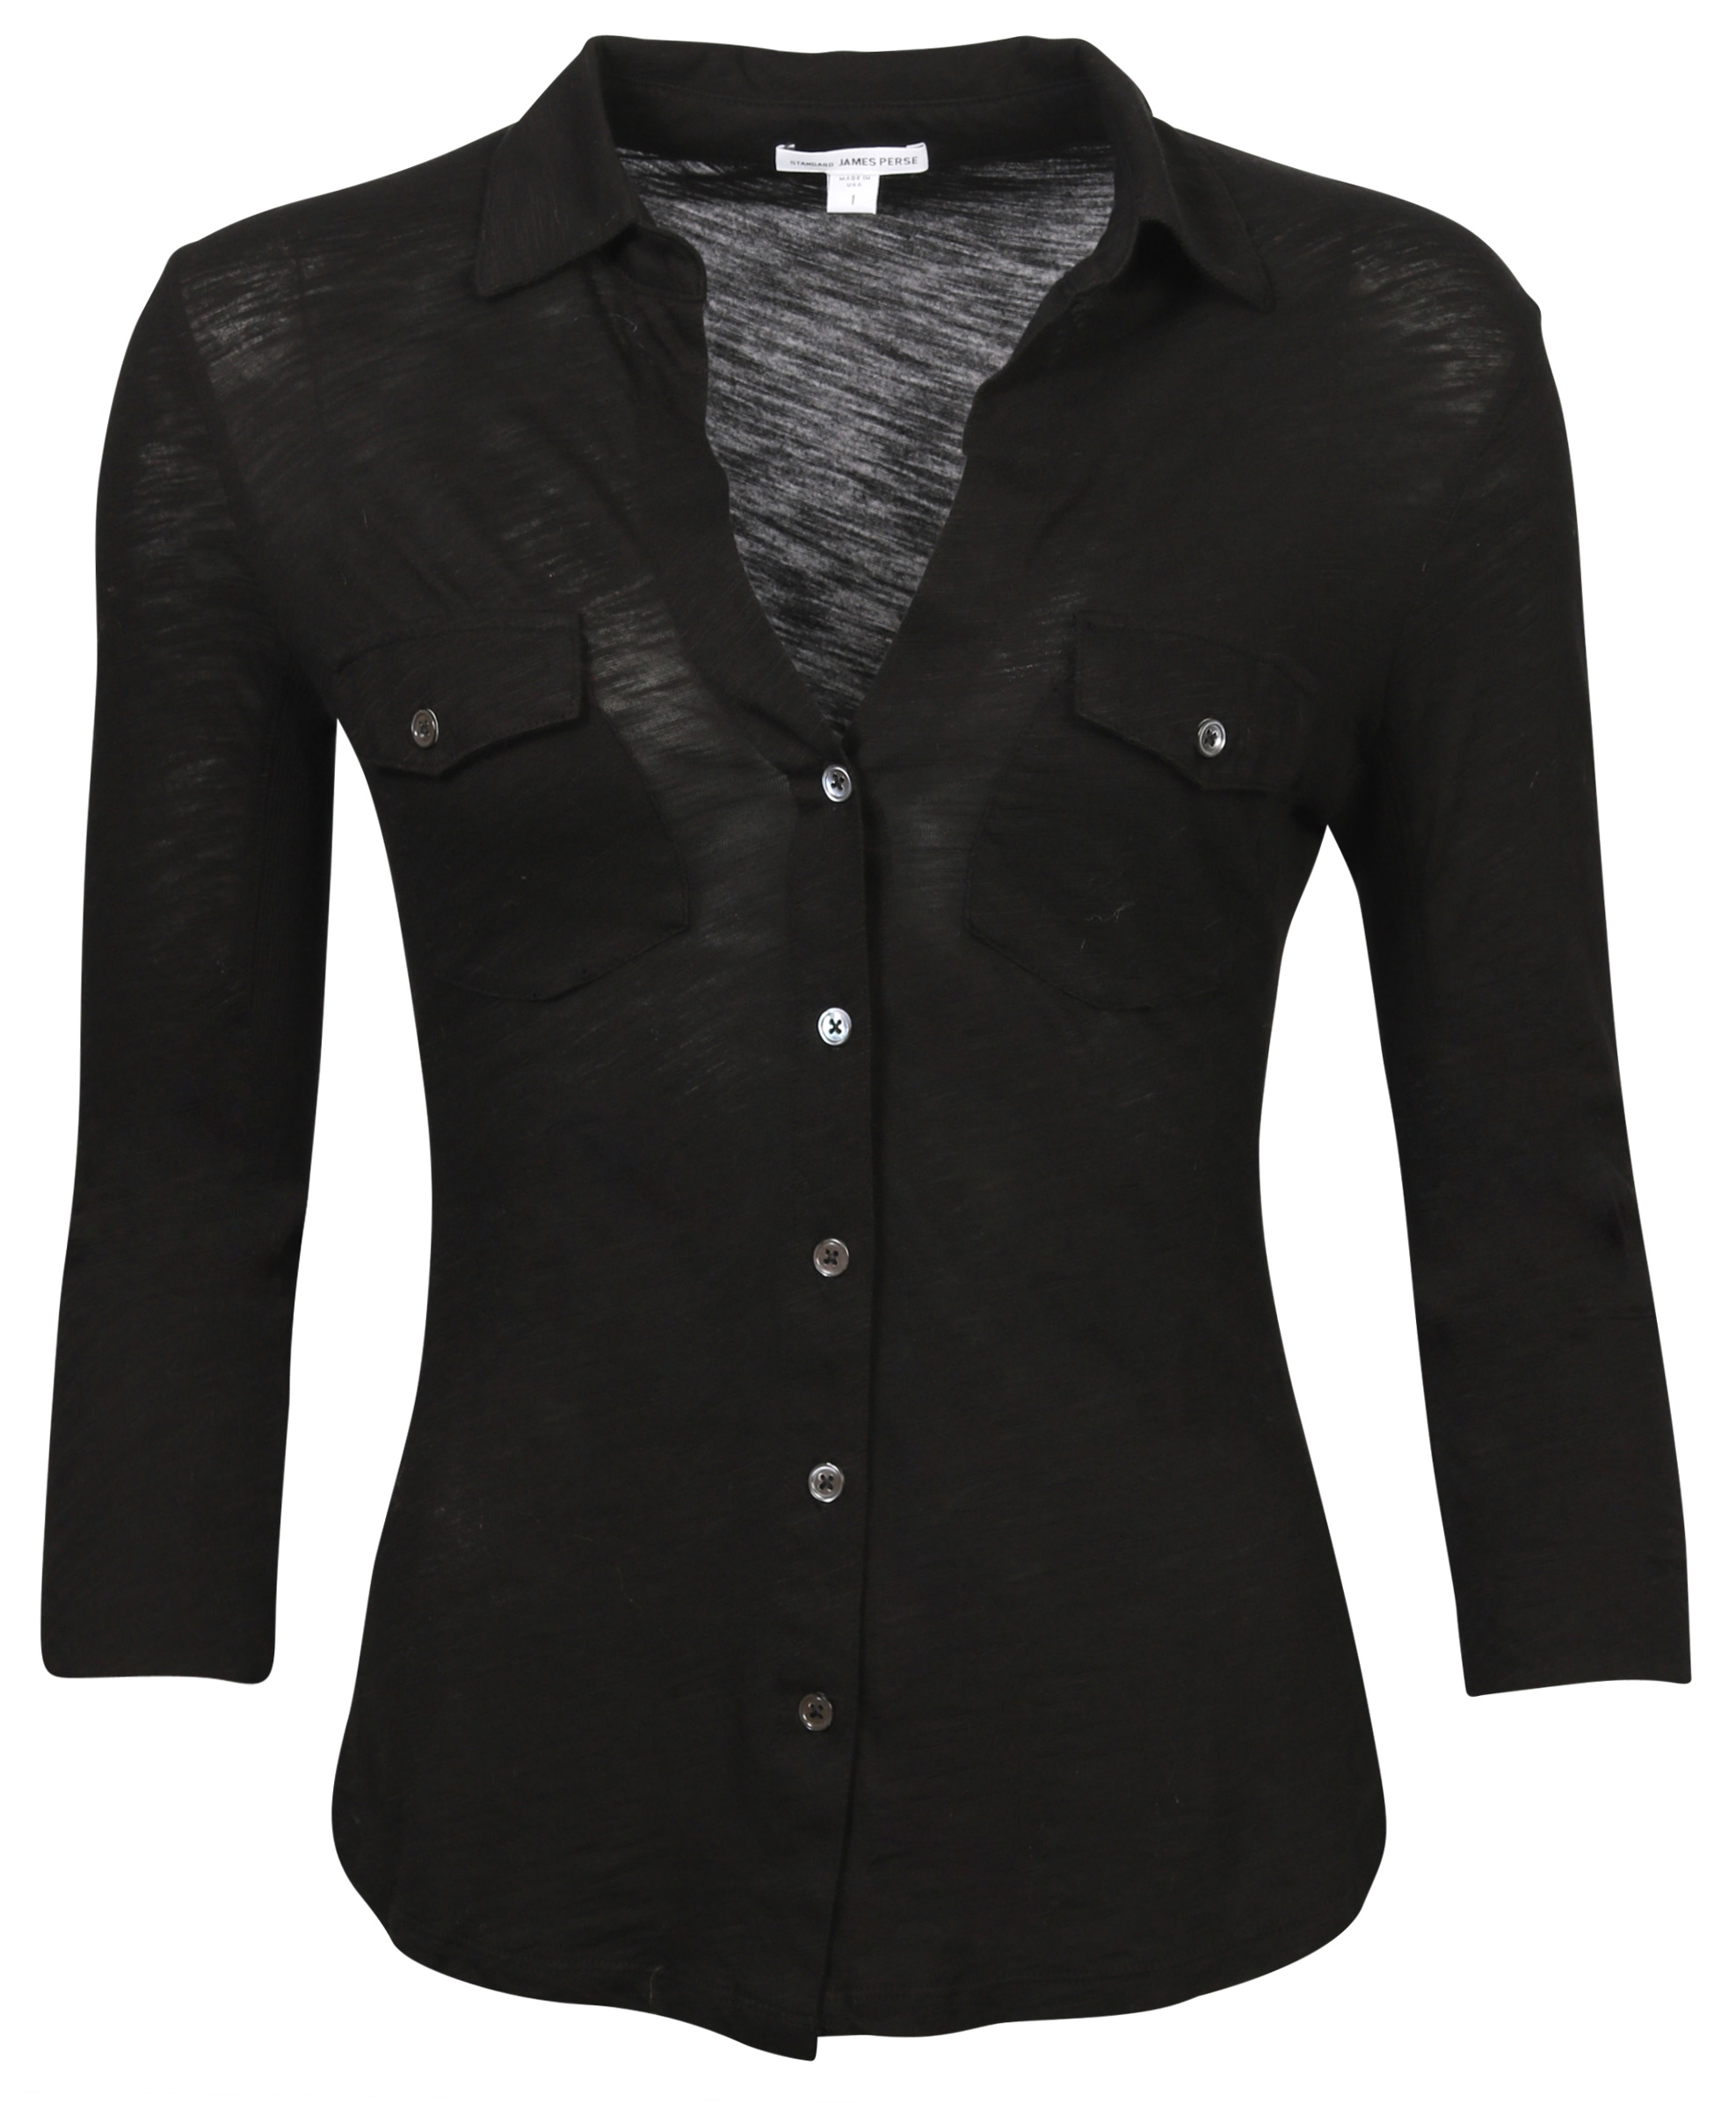 JAMES PERSE Contrast Panel Shirt in Black 1/S